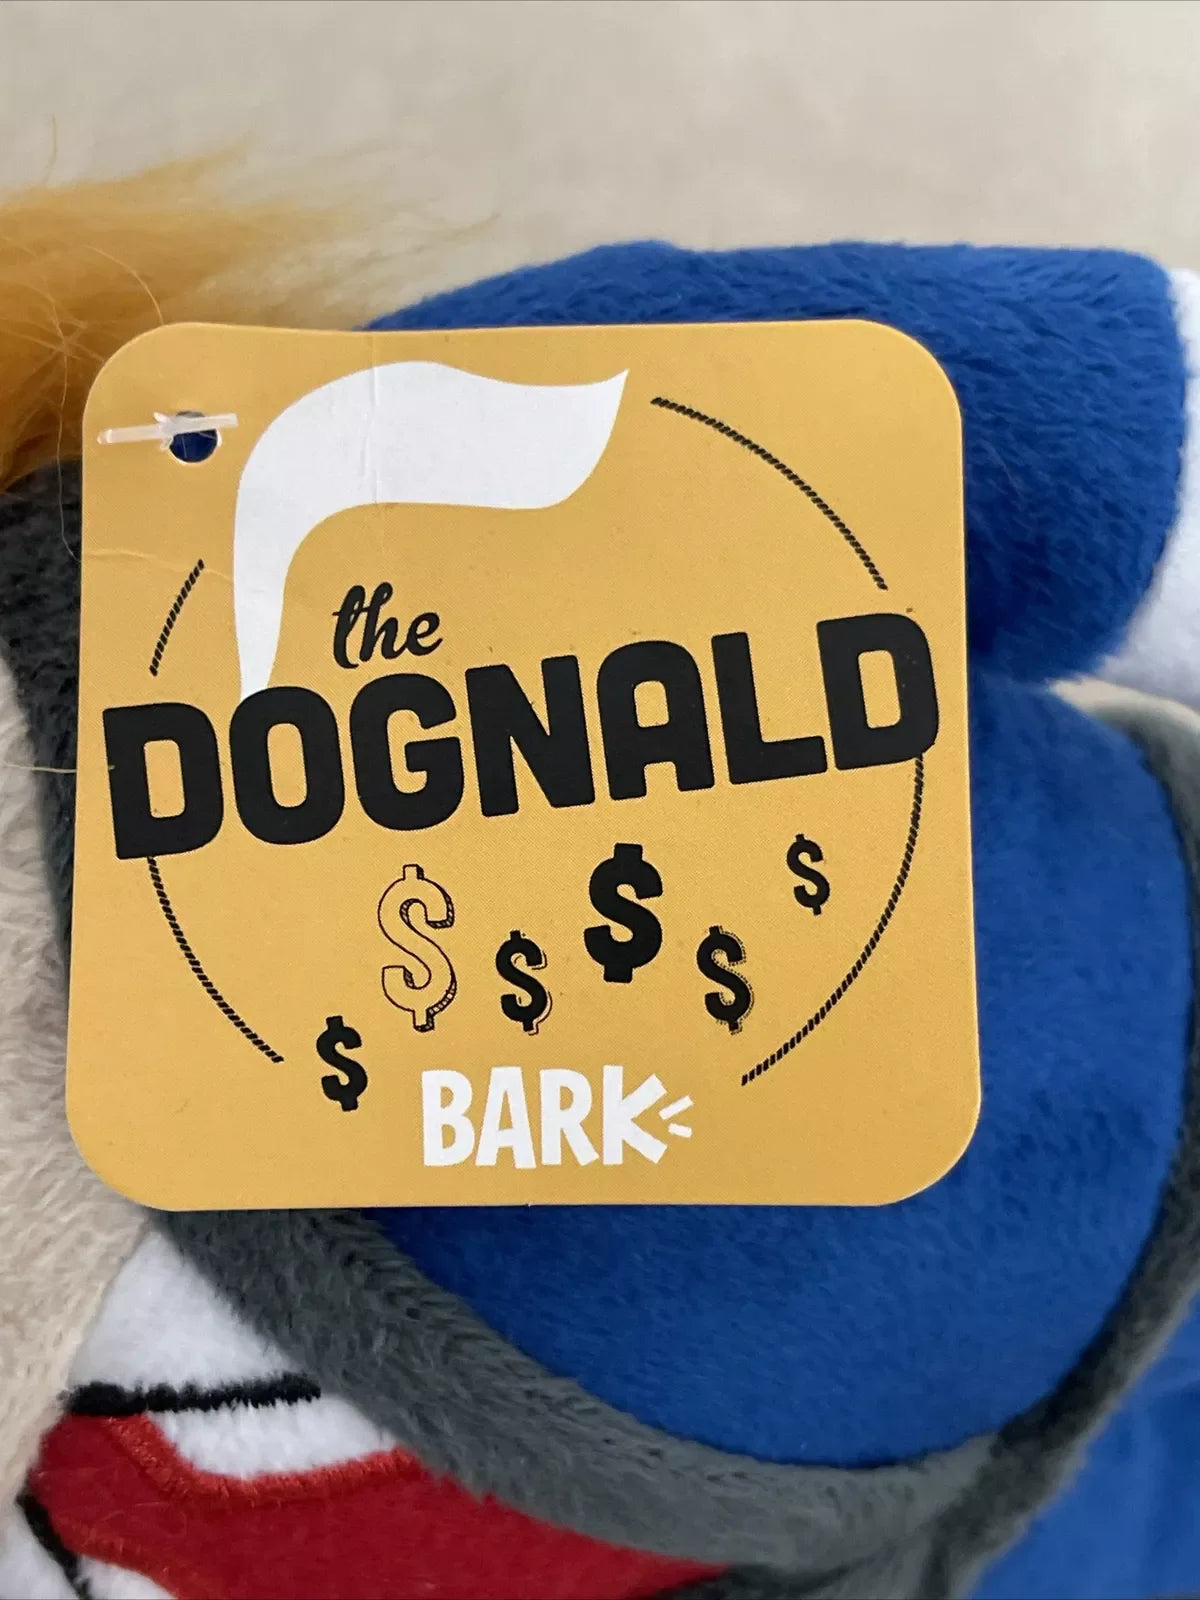 The DOGNALD, Presidential Dog Toy